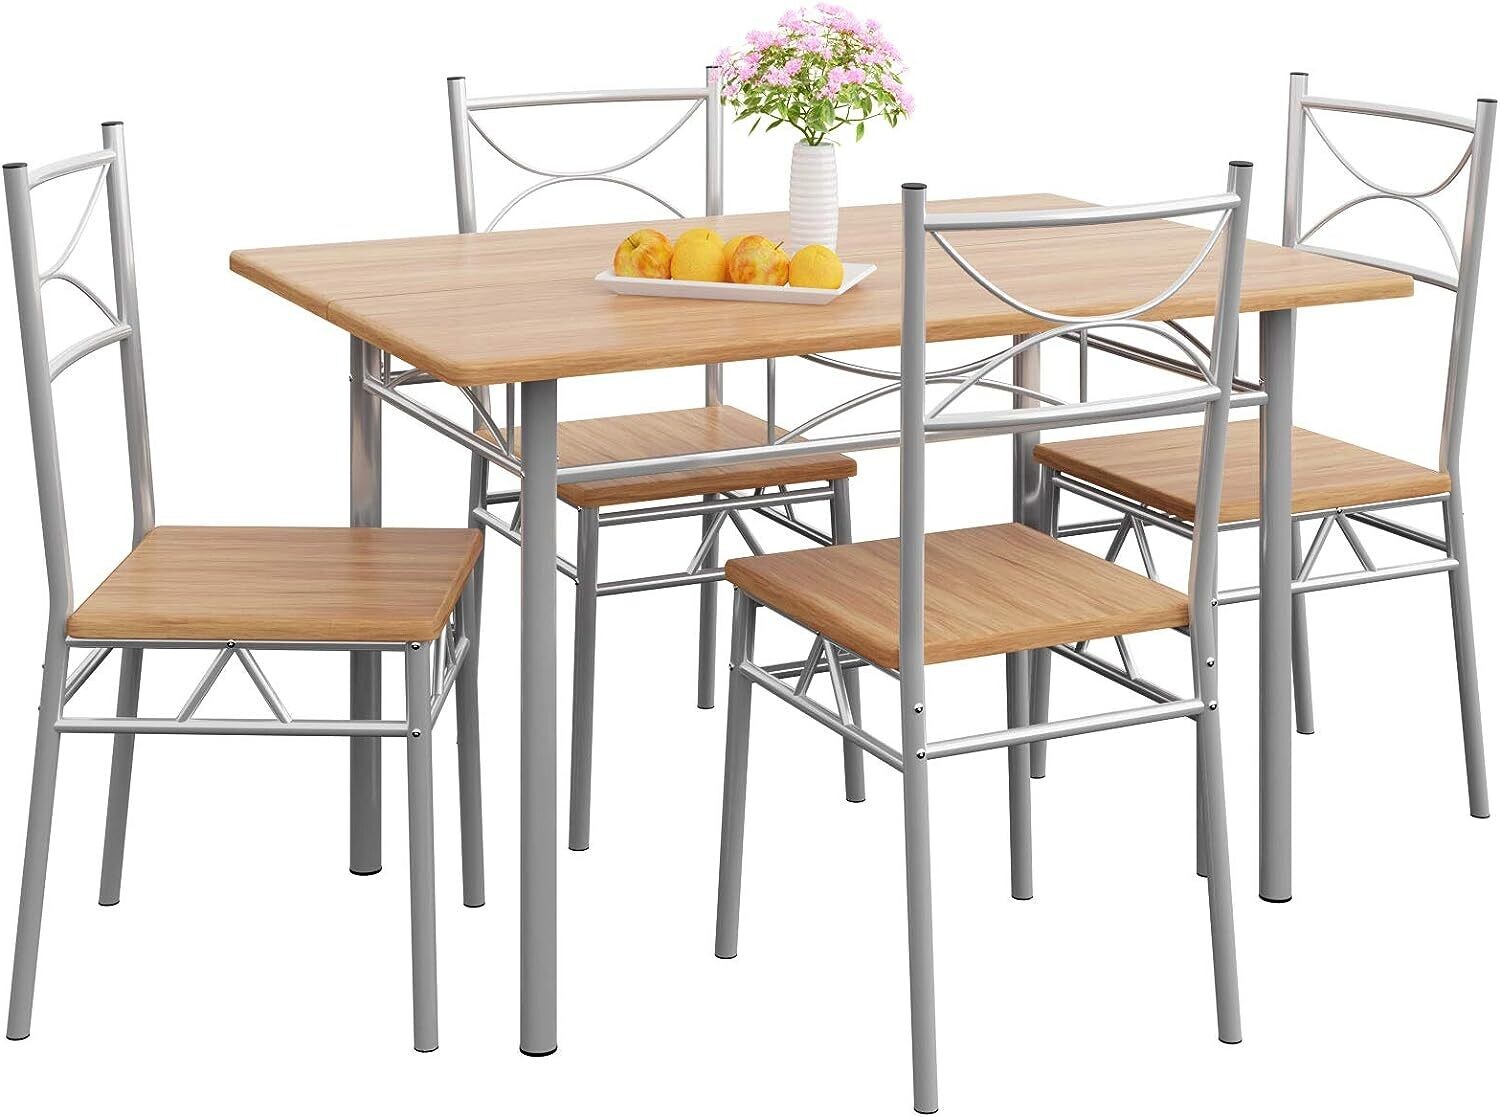 Dining Set with 4 Chairs and 1 Compact Modern Contemporary Rectangular Dining Table | Small Kitchen Breakfast Furniture